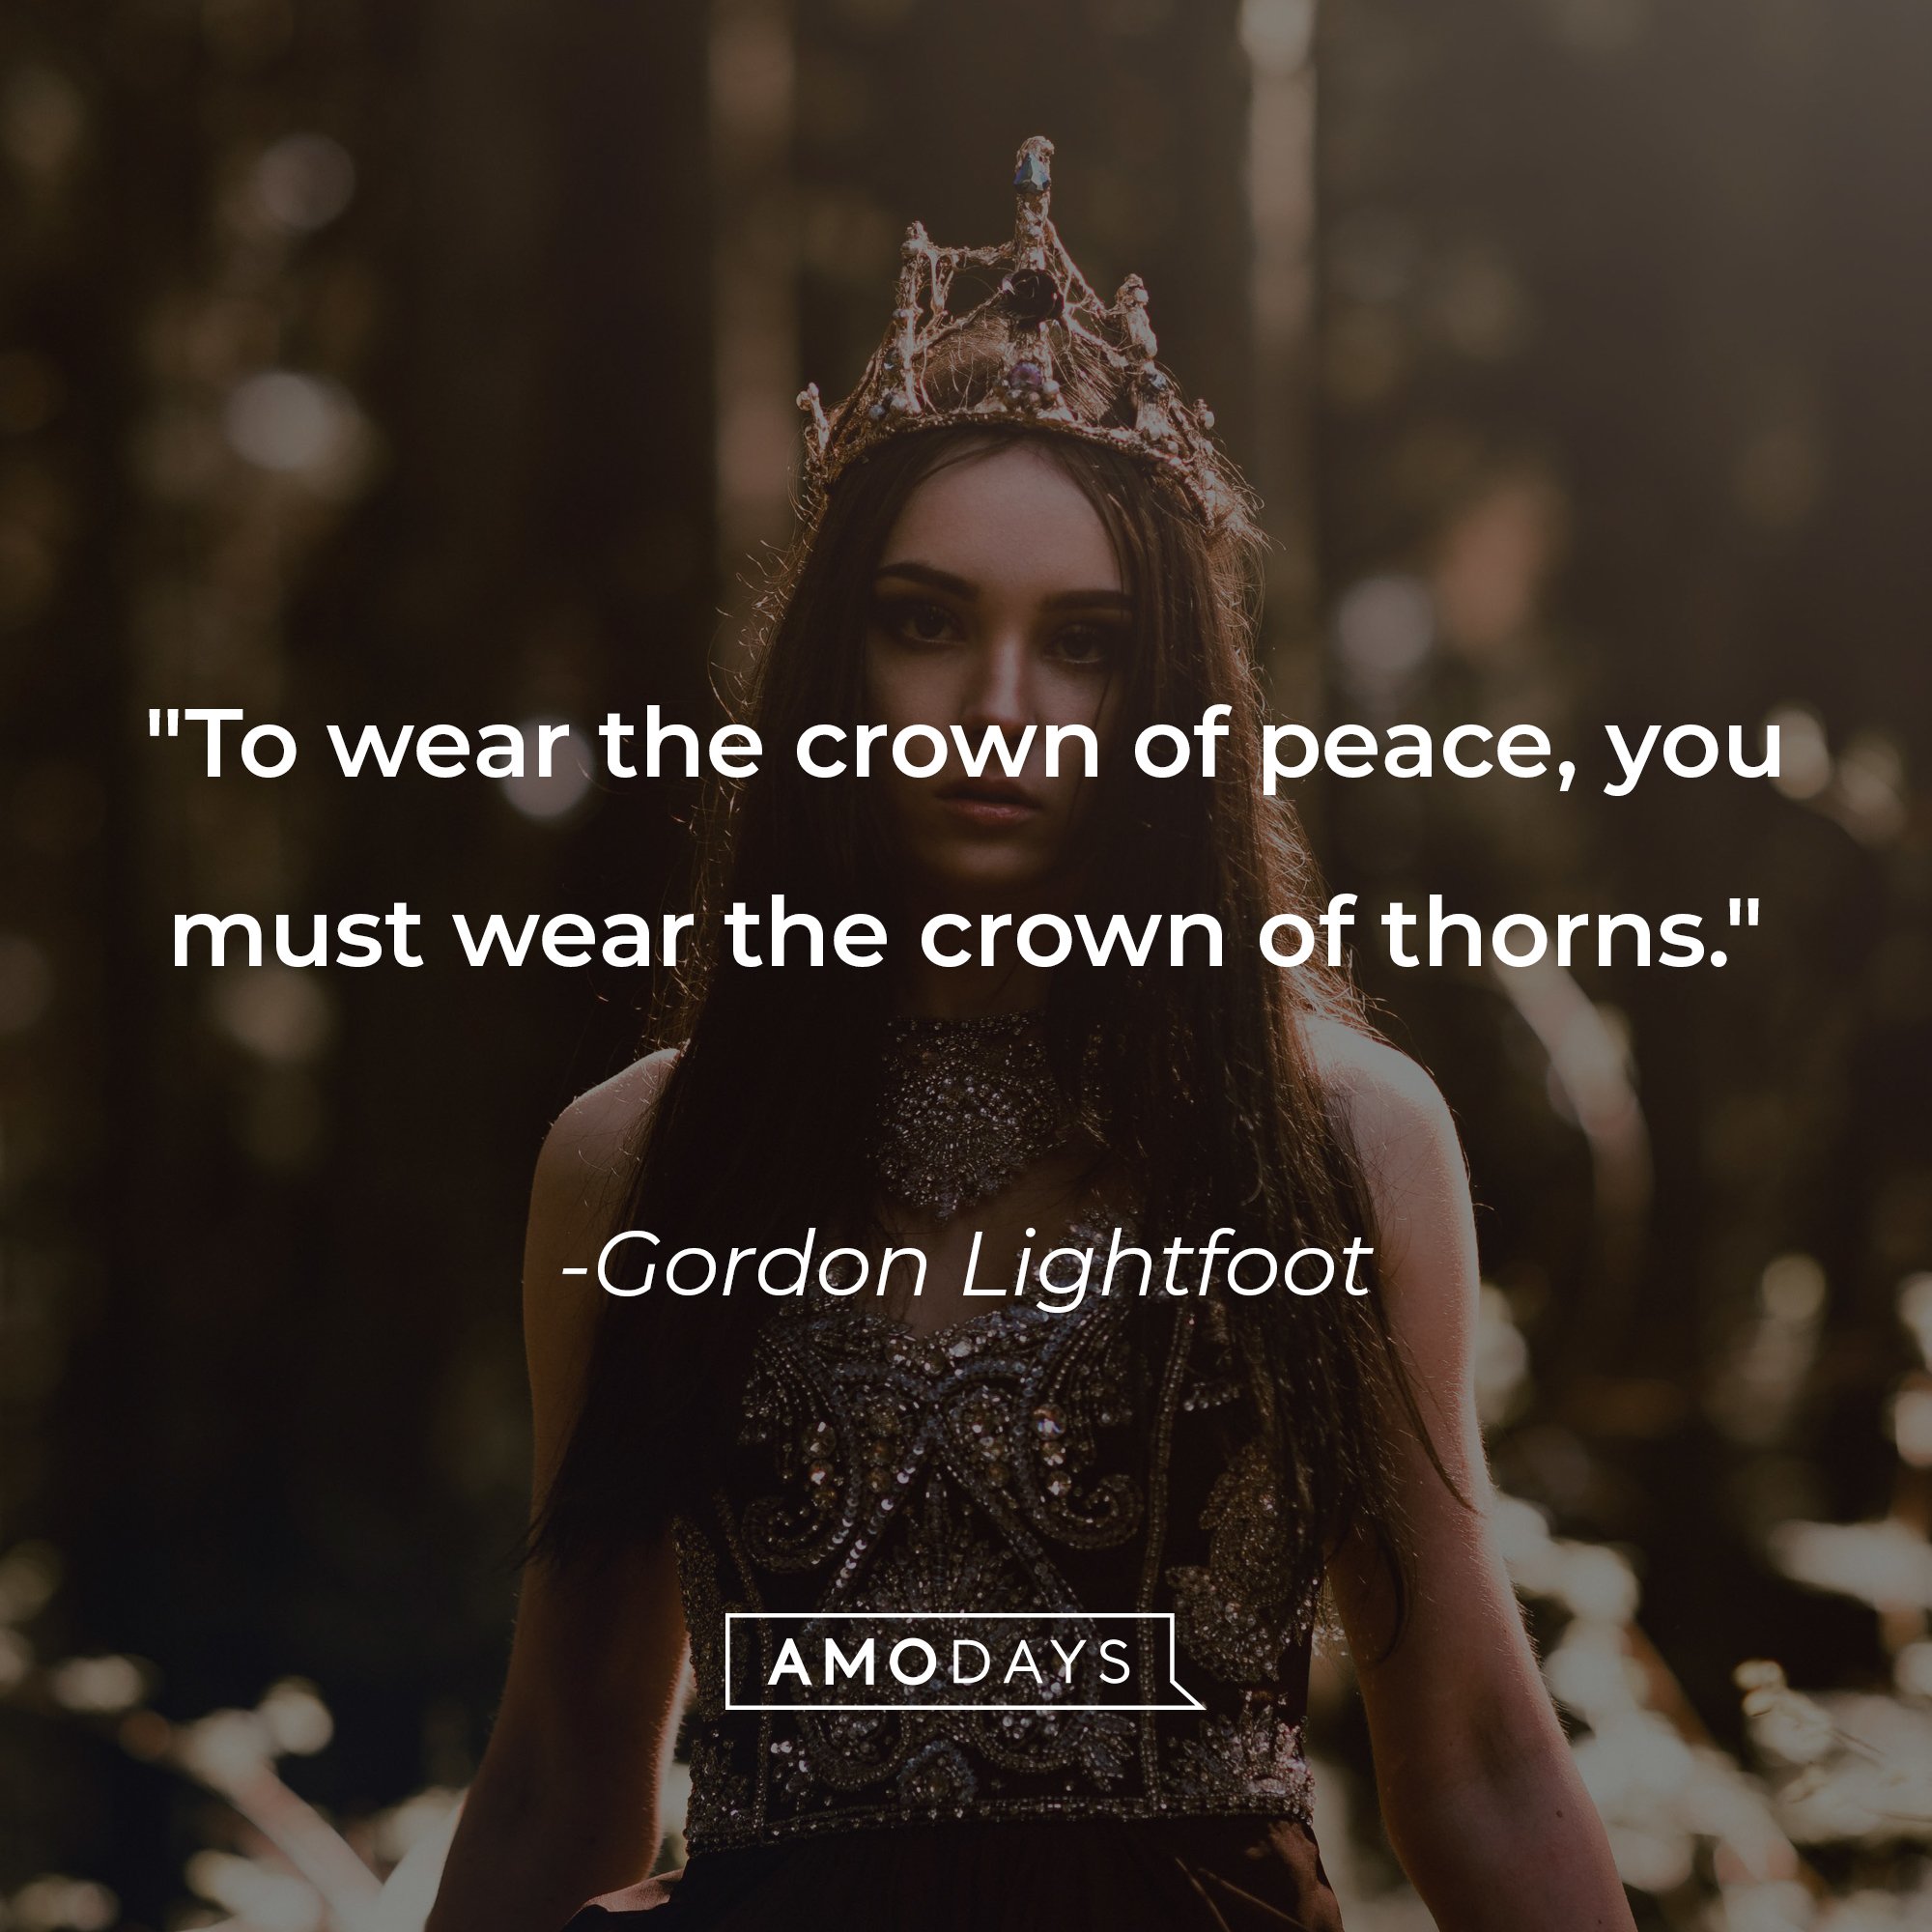 Gordon Lightfoot's quote: "To wear the crown of peace, you must wear the crown of thorns." | Image: AmoDays